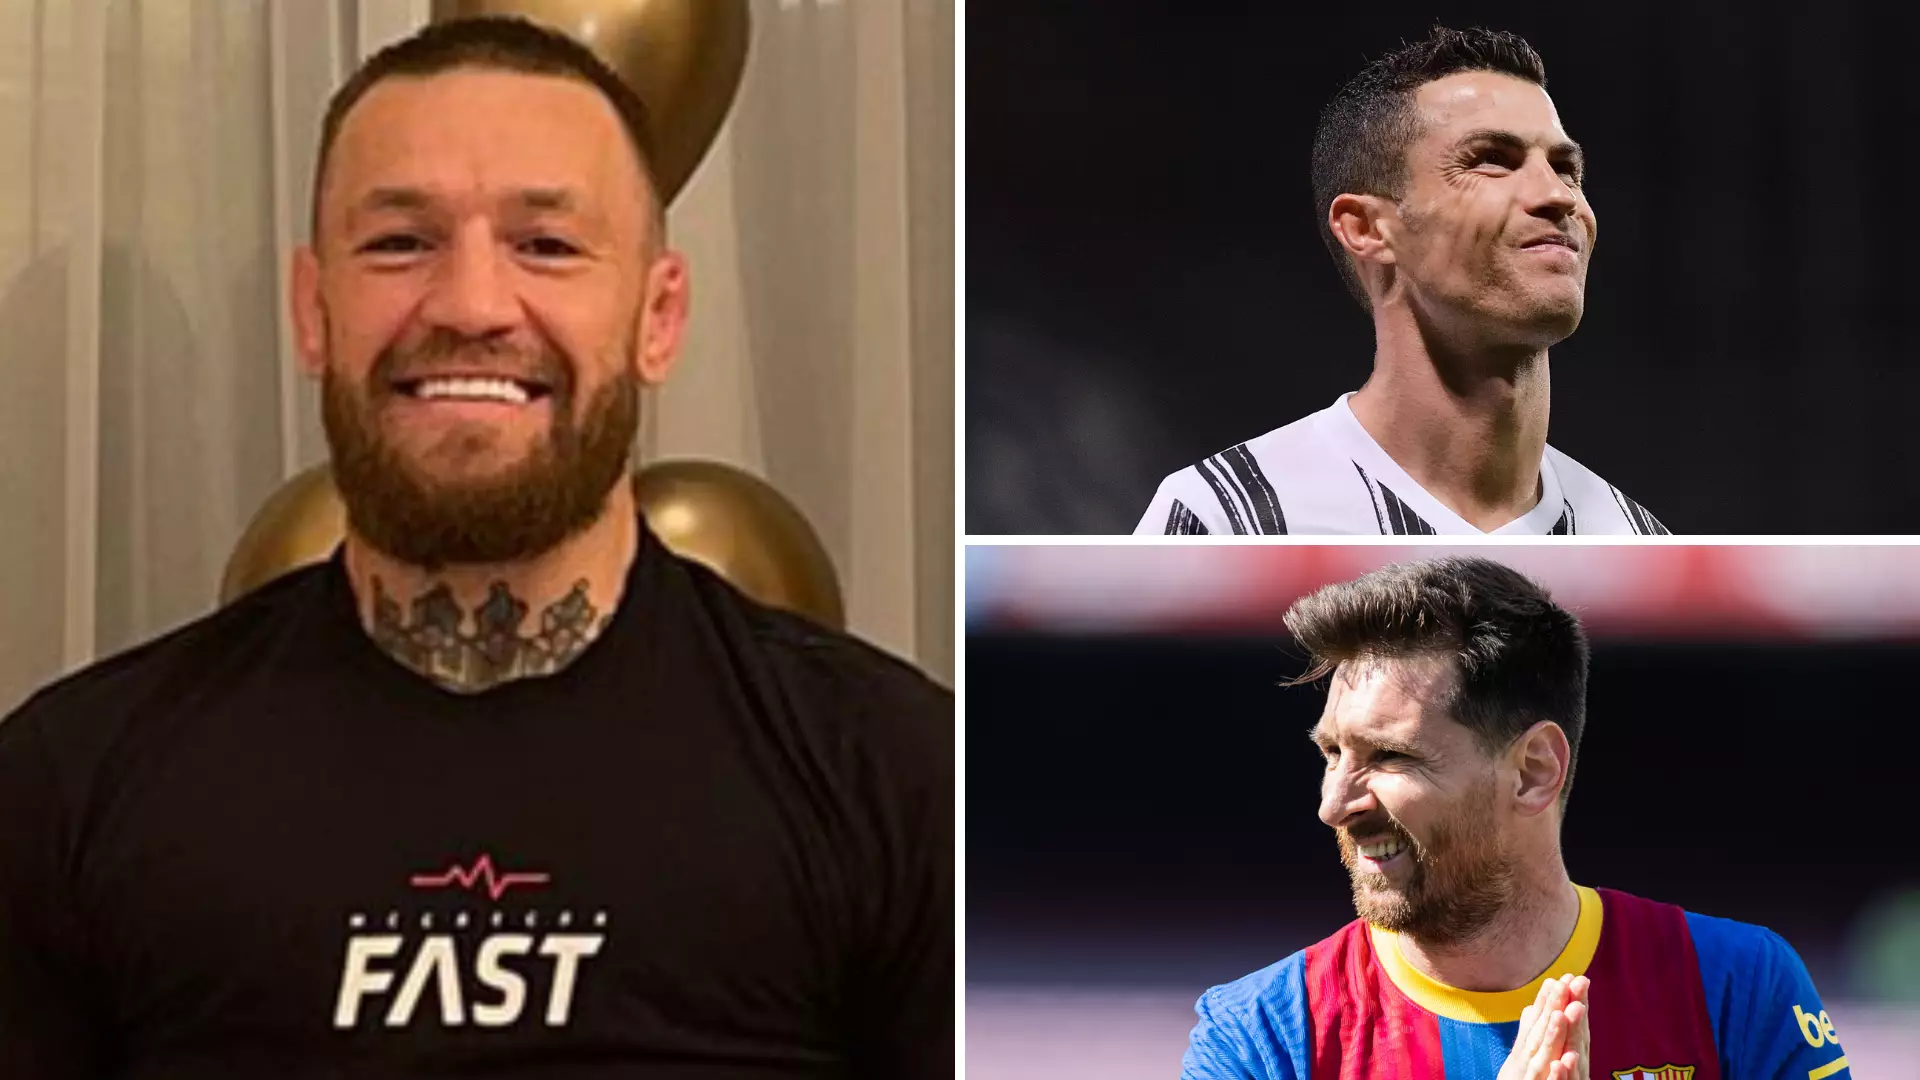 UFC Star Conor McGregor Reacts To Beating Cristiano Ronaldo And Lionel Messi As World's Highest-Paid Athlete